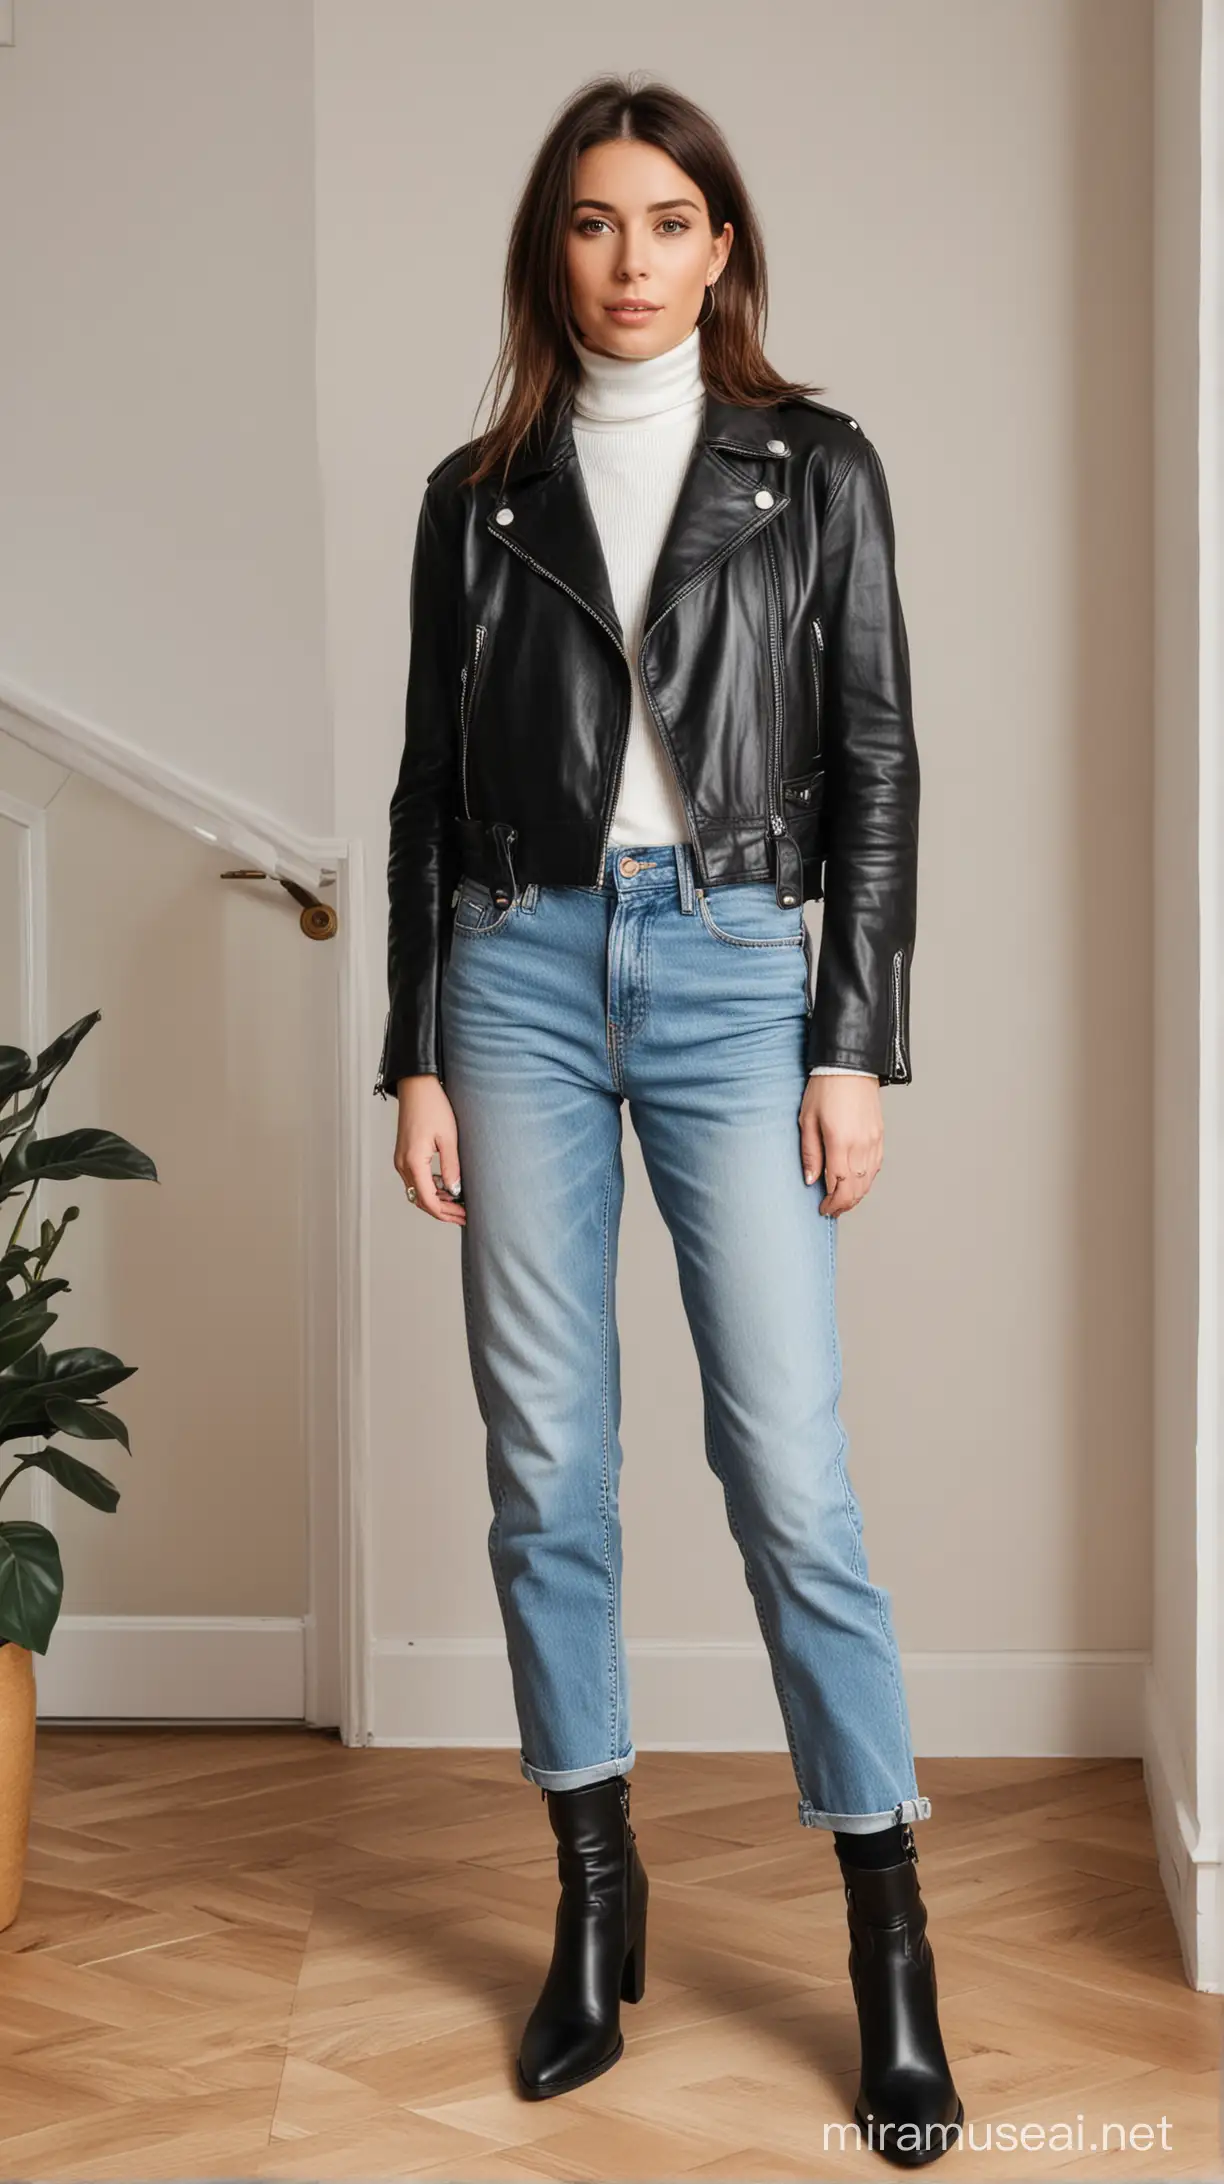 Woman wearing cropped jeans, ankle boots, white turtleneck and a leather biker jacket in her house